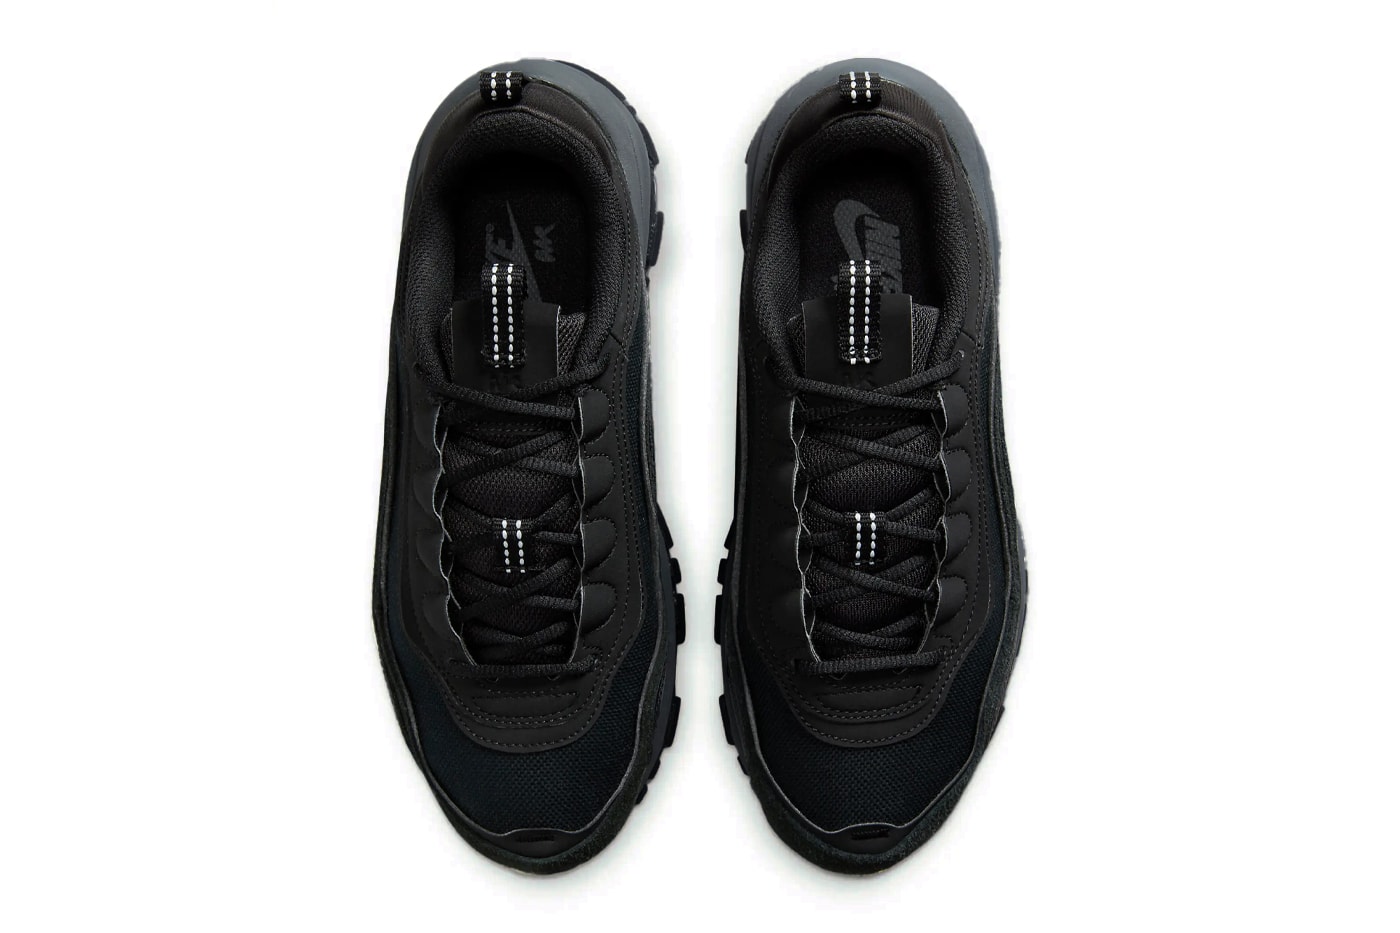 Nike Air Max 97 Futura Surfaces in Stealthy "Triple Black" FB4496-002 release info swoosh sneakers oversized technical dad shoes subtle all black